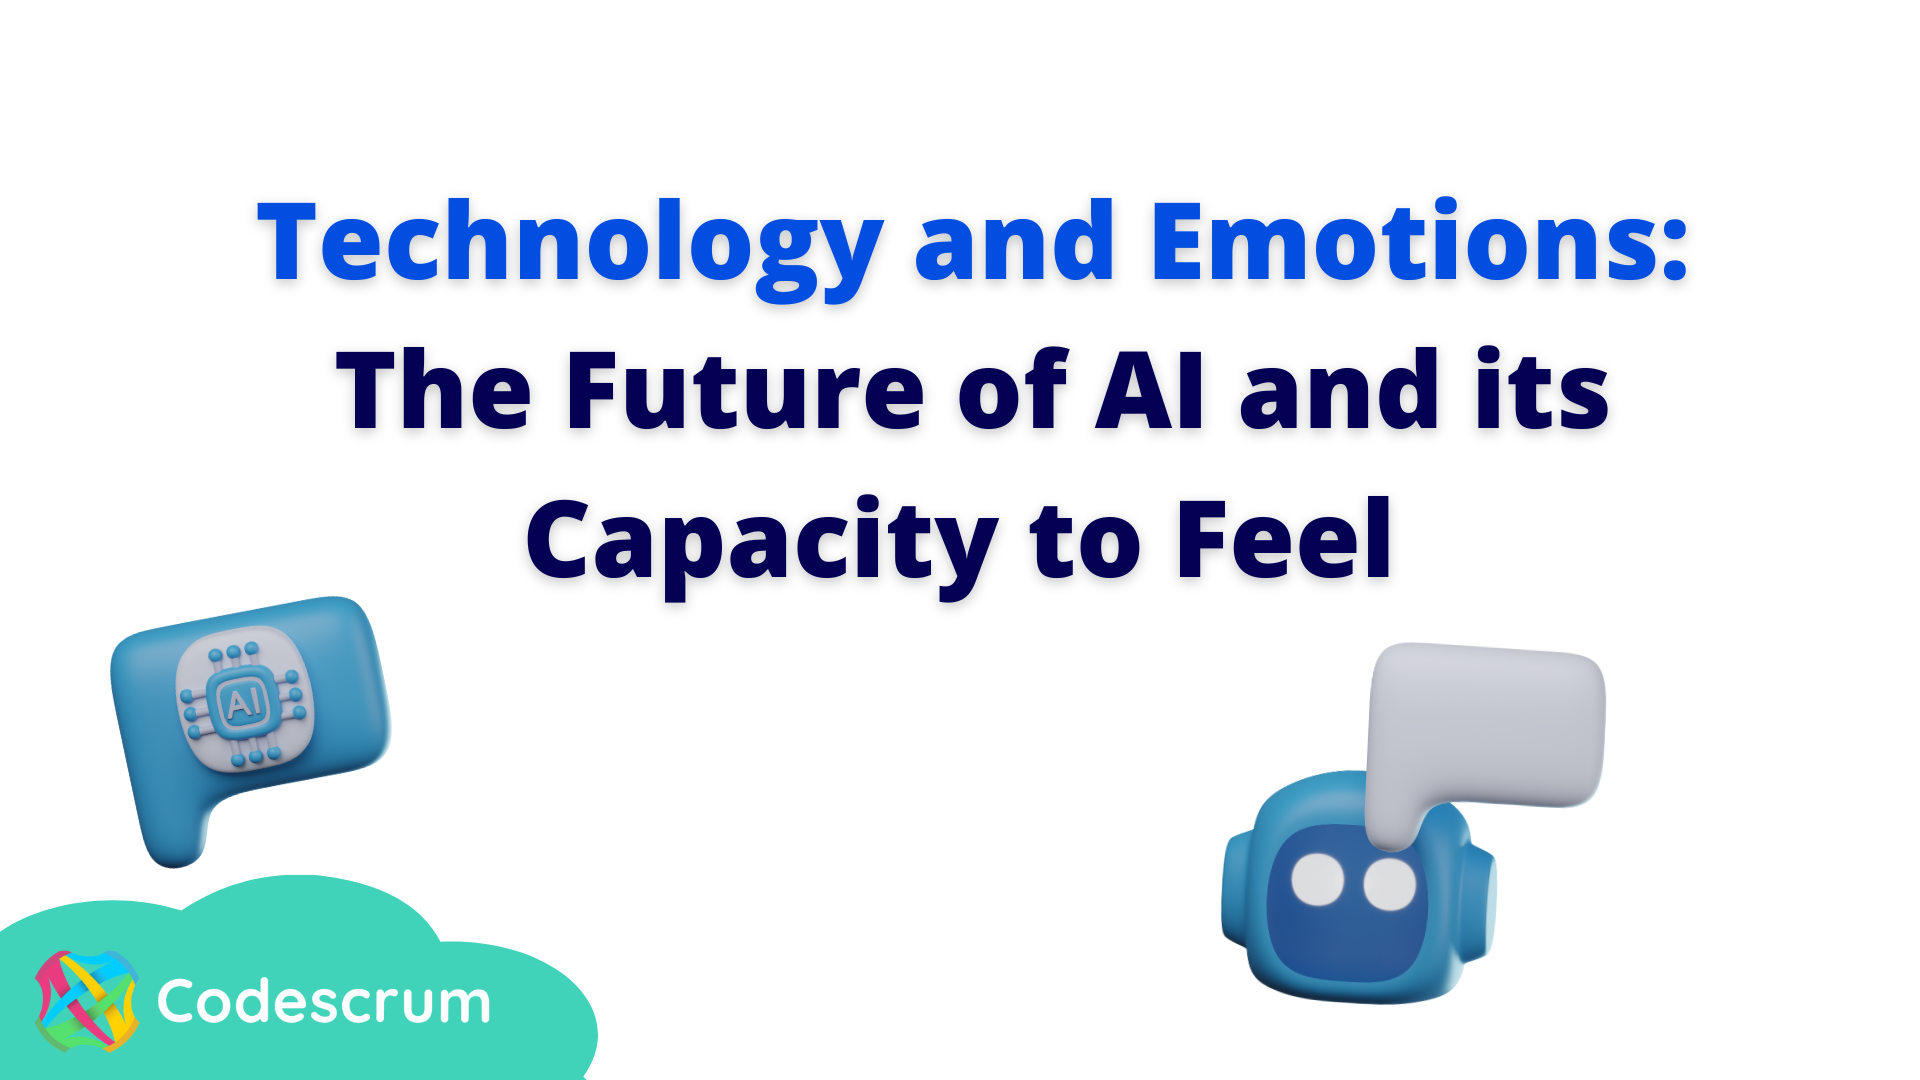 Technology and emotions: The future of AI and its capacity to feel